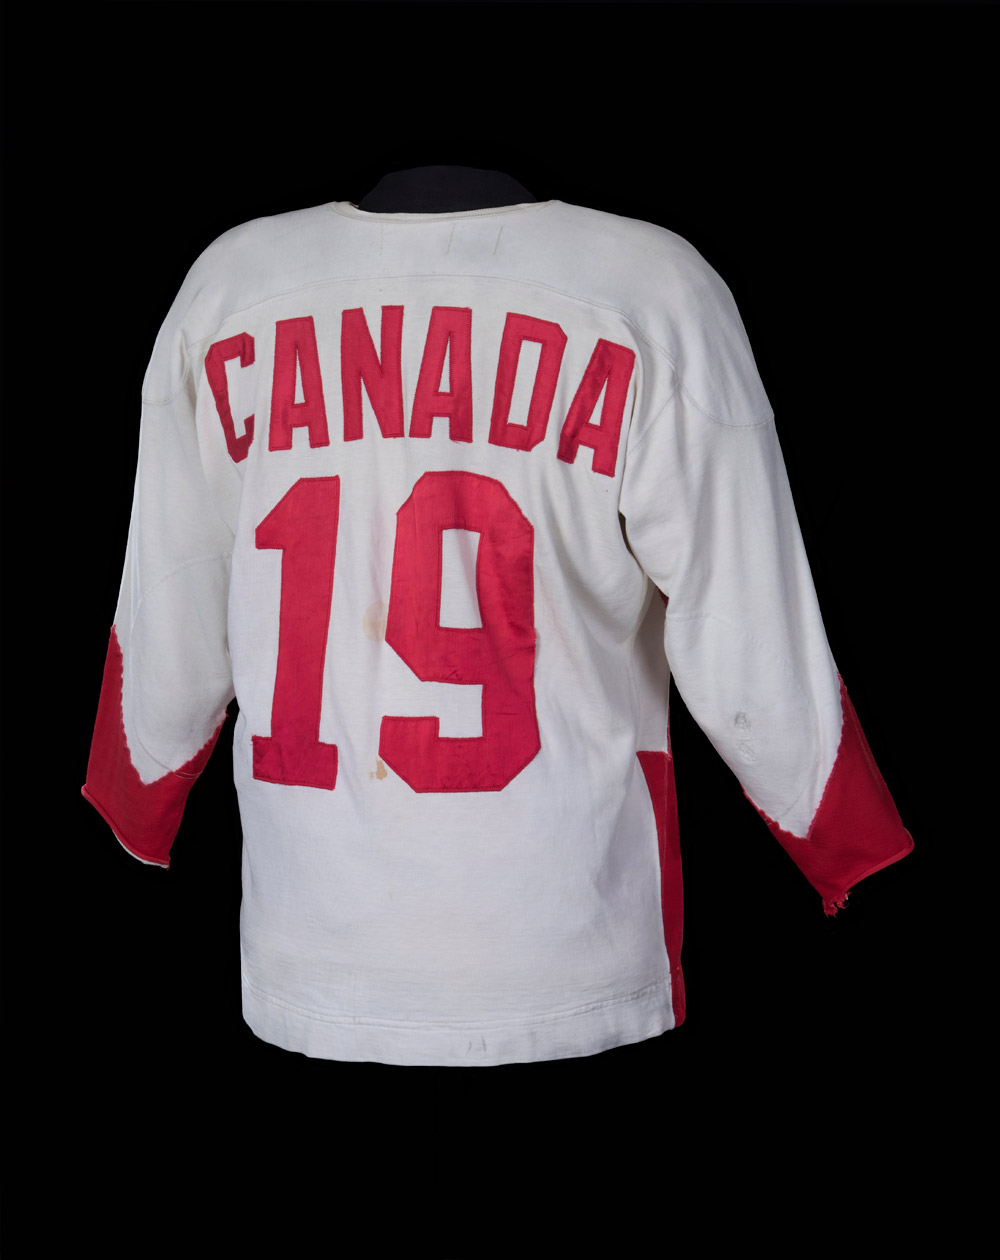 The back of a Canadian national hockey team jersey, number 19